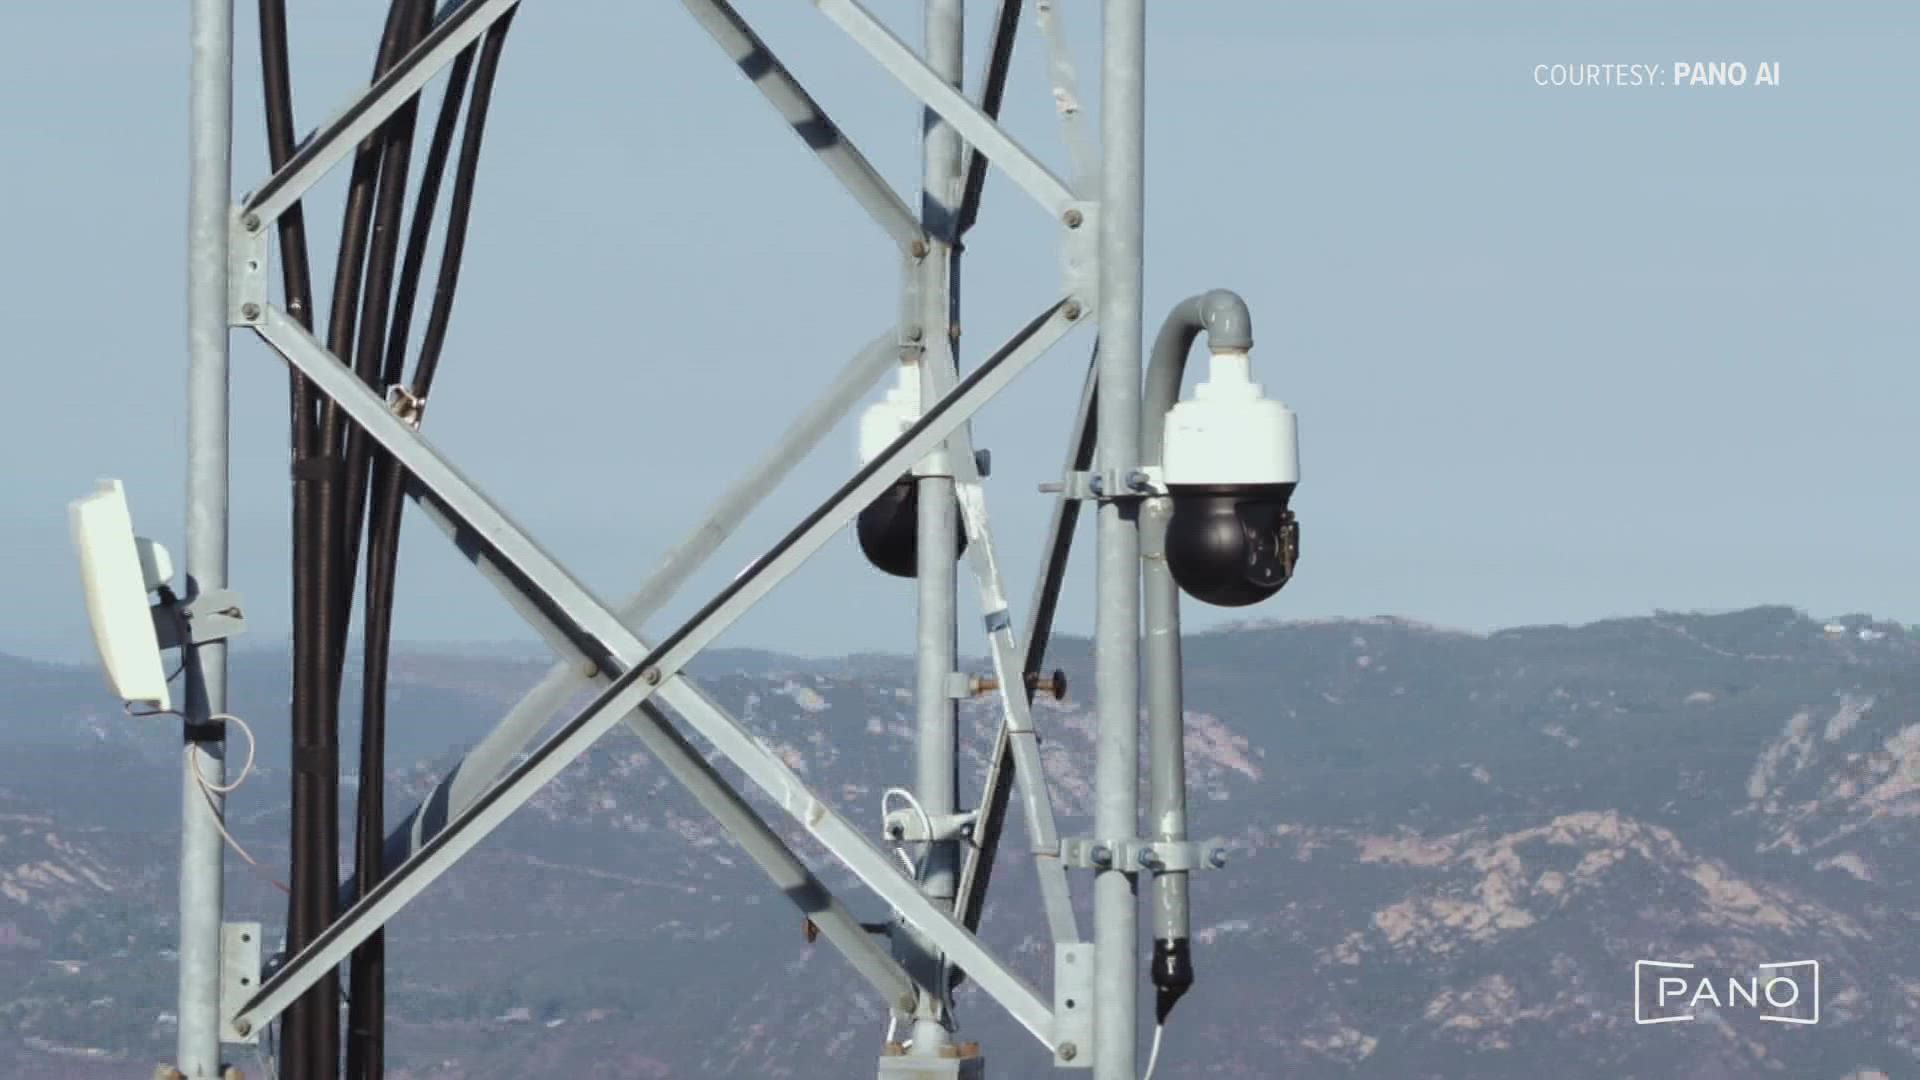 Start-up Pano AI says it uses 360 cameras, artificial intelligence and T-Mobile's 5G to spot fires and notify agencies who've procured its systems.